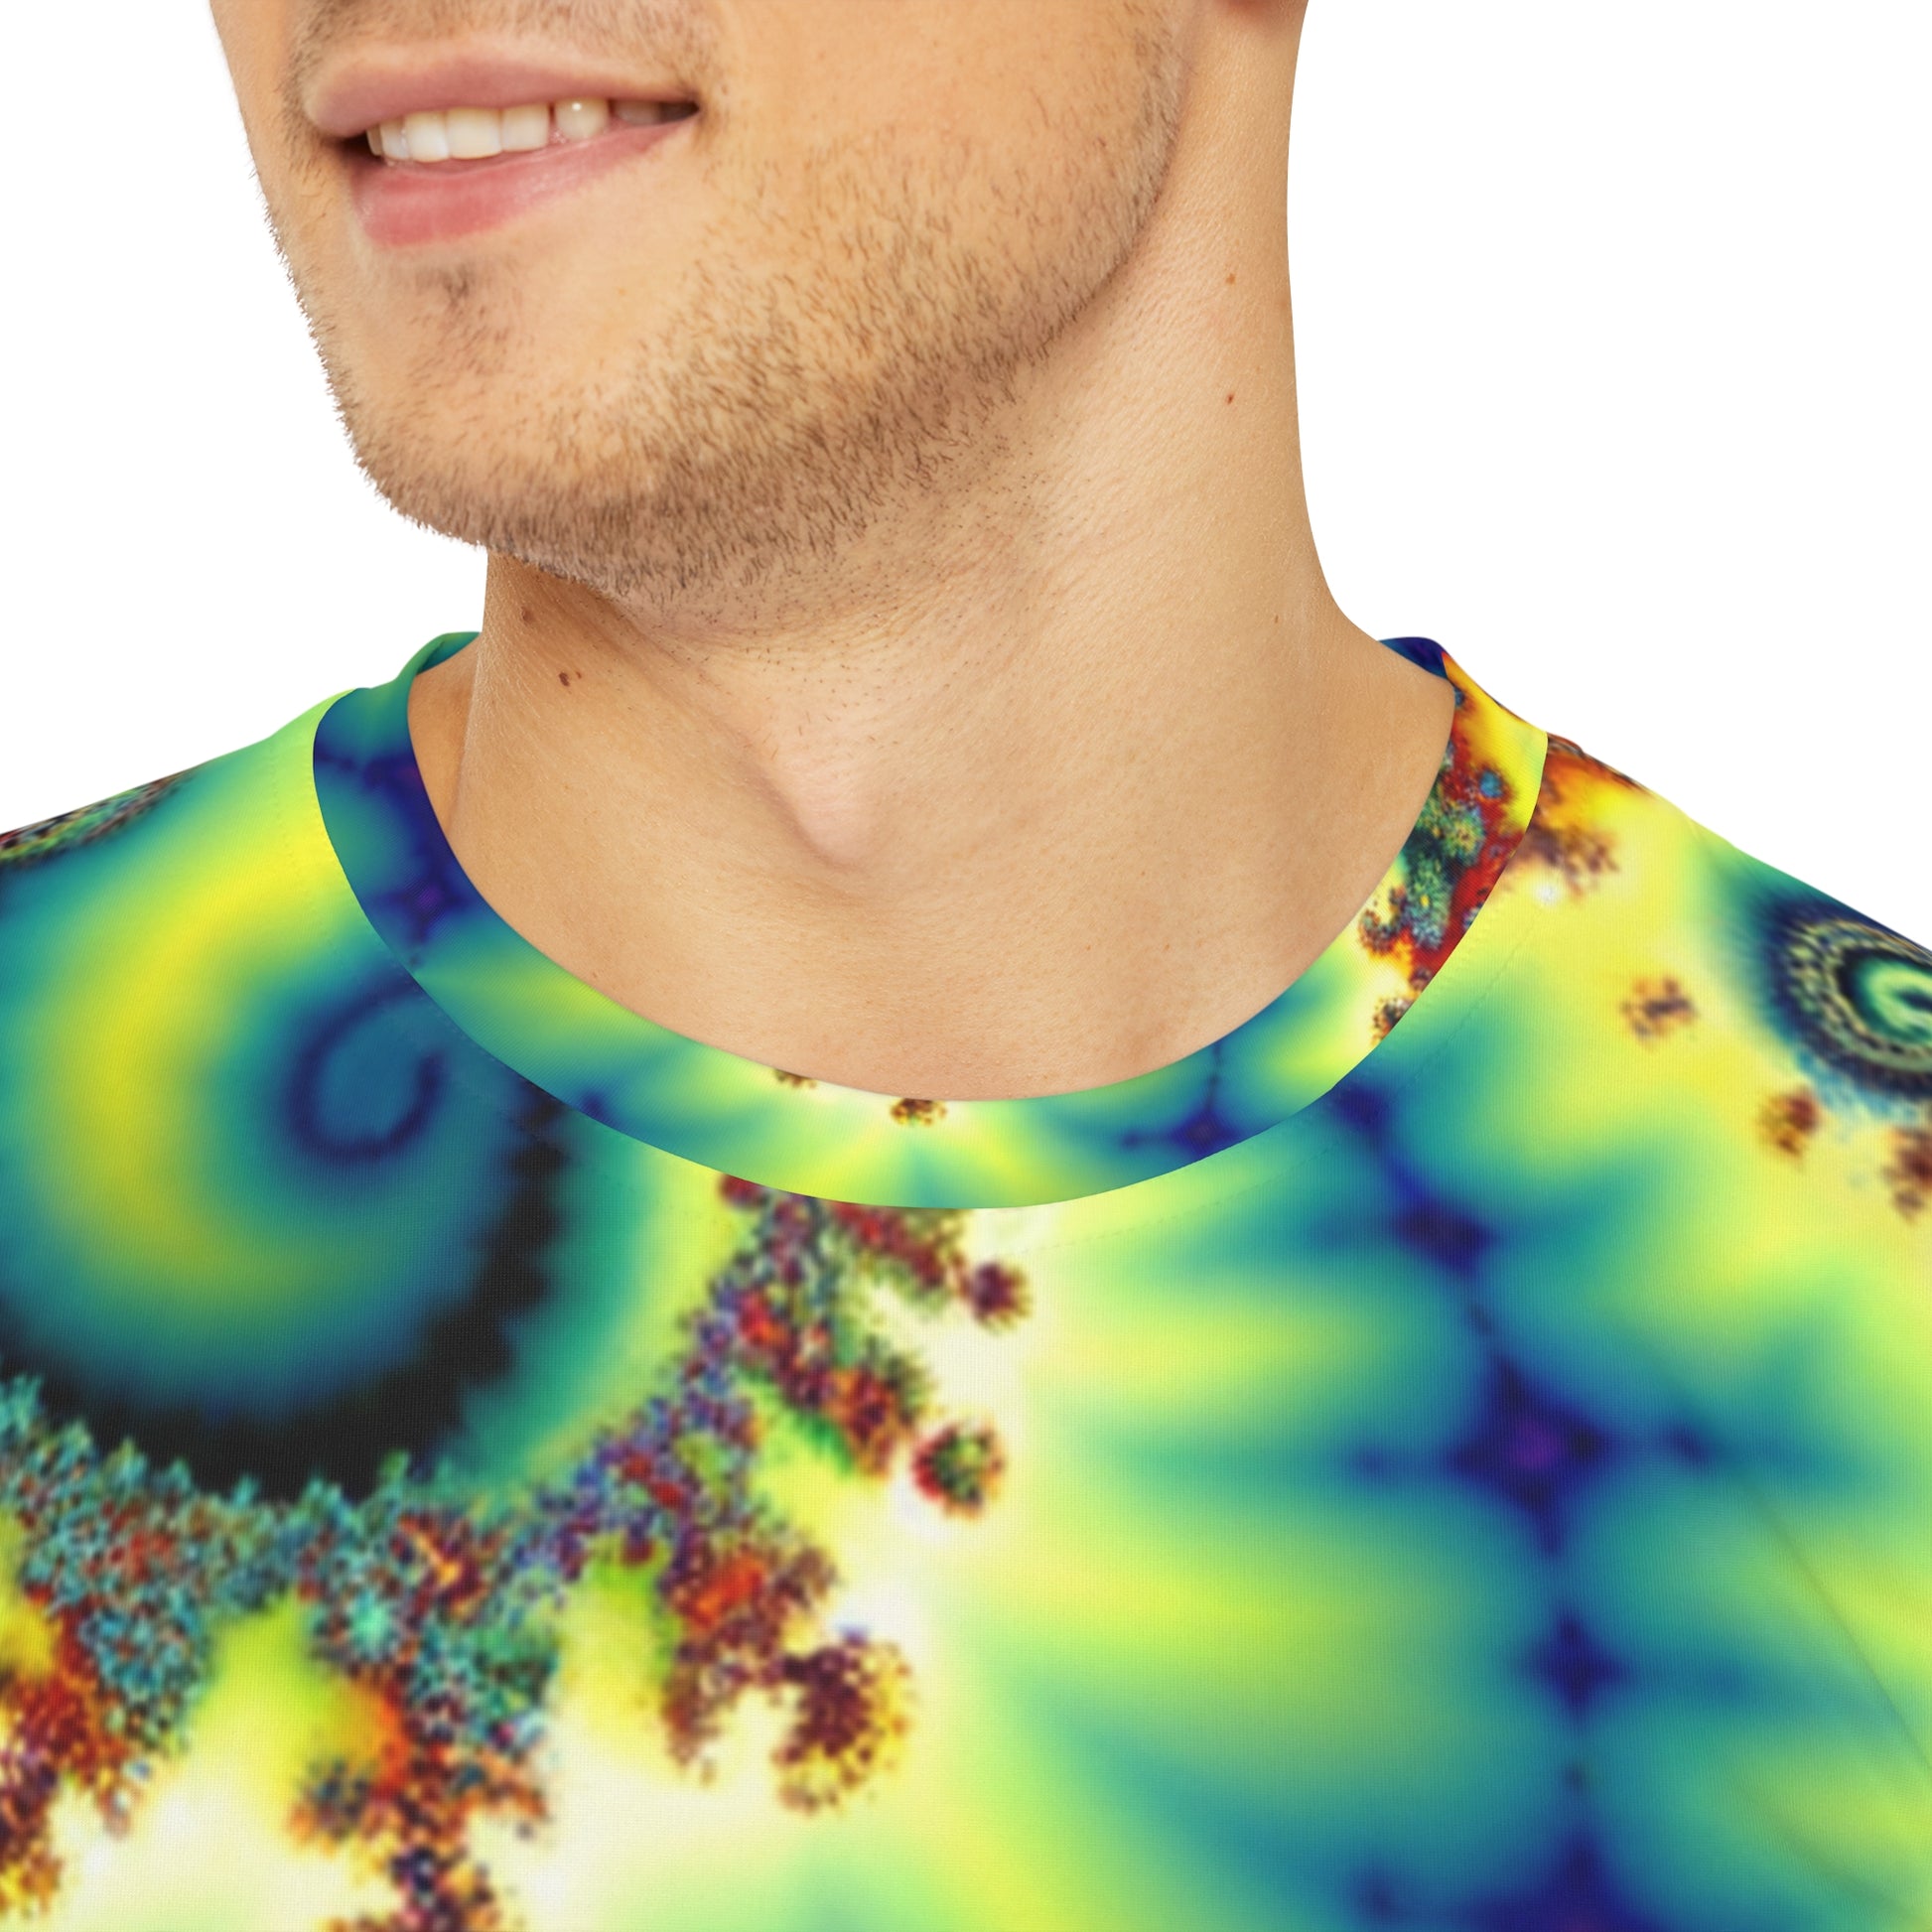 Close-up shot of the Spectral Helix Dreamatorium Crewneck Pullover All-Over Print Short-Sleeved Shirt yellow oranger red blue green purple spectral pattern worn  by a white man